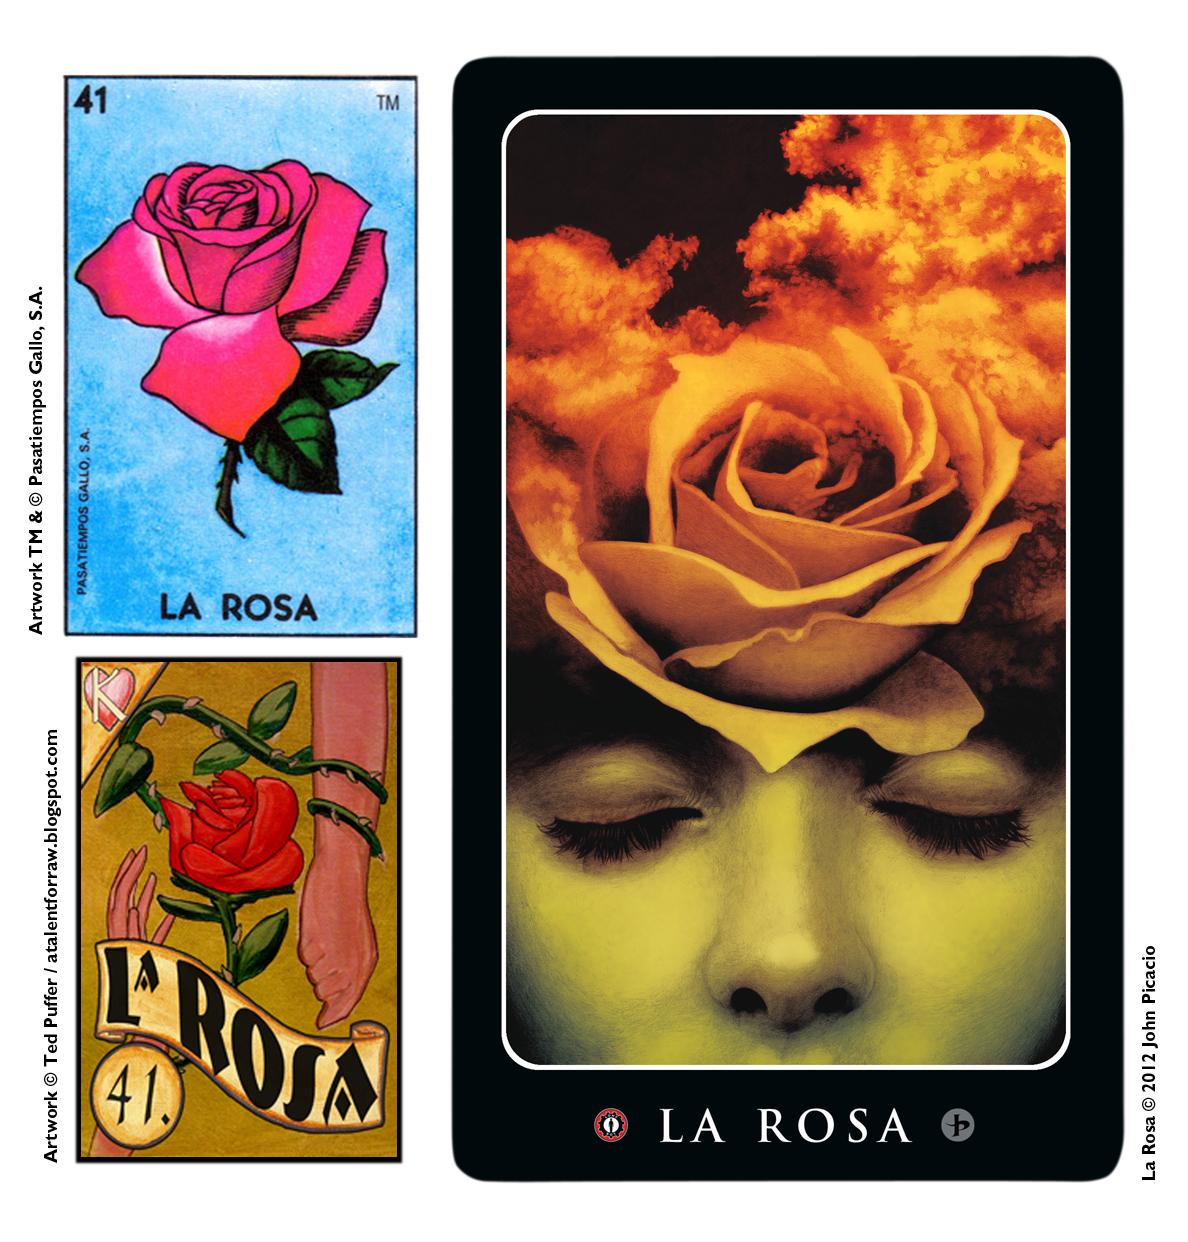 Harry Potter Loteria, Traditional Loteria Mexicana Game of Chance, Bingo  Style Game Featuring Custom Artwork & Illustrations from Harry Potter Films, Inspire… [Video] [Video]